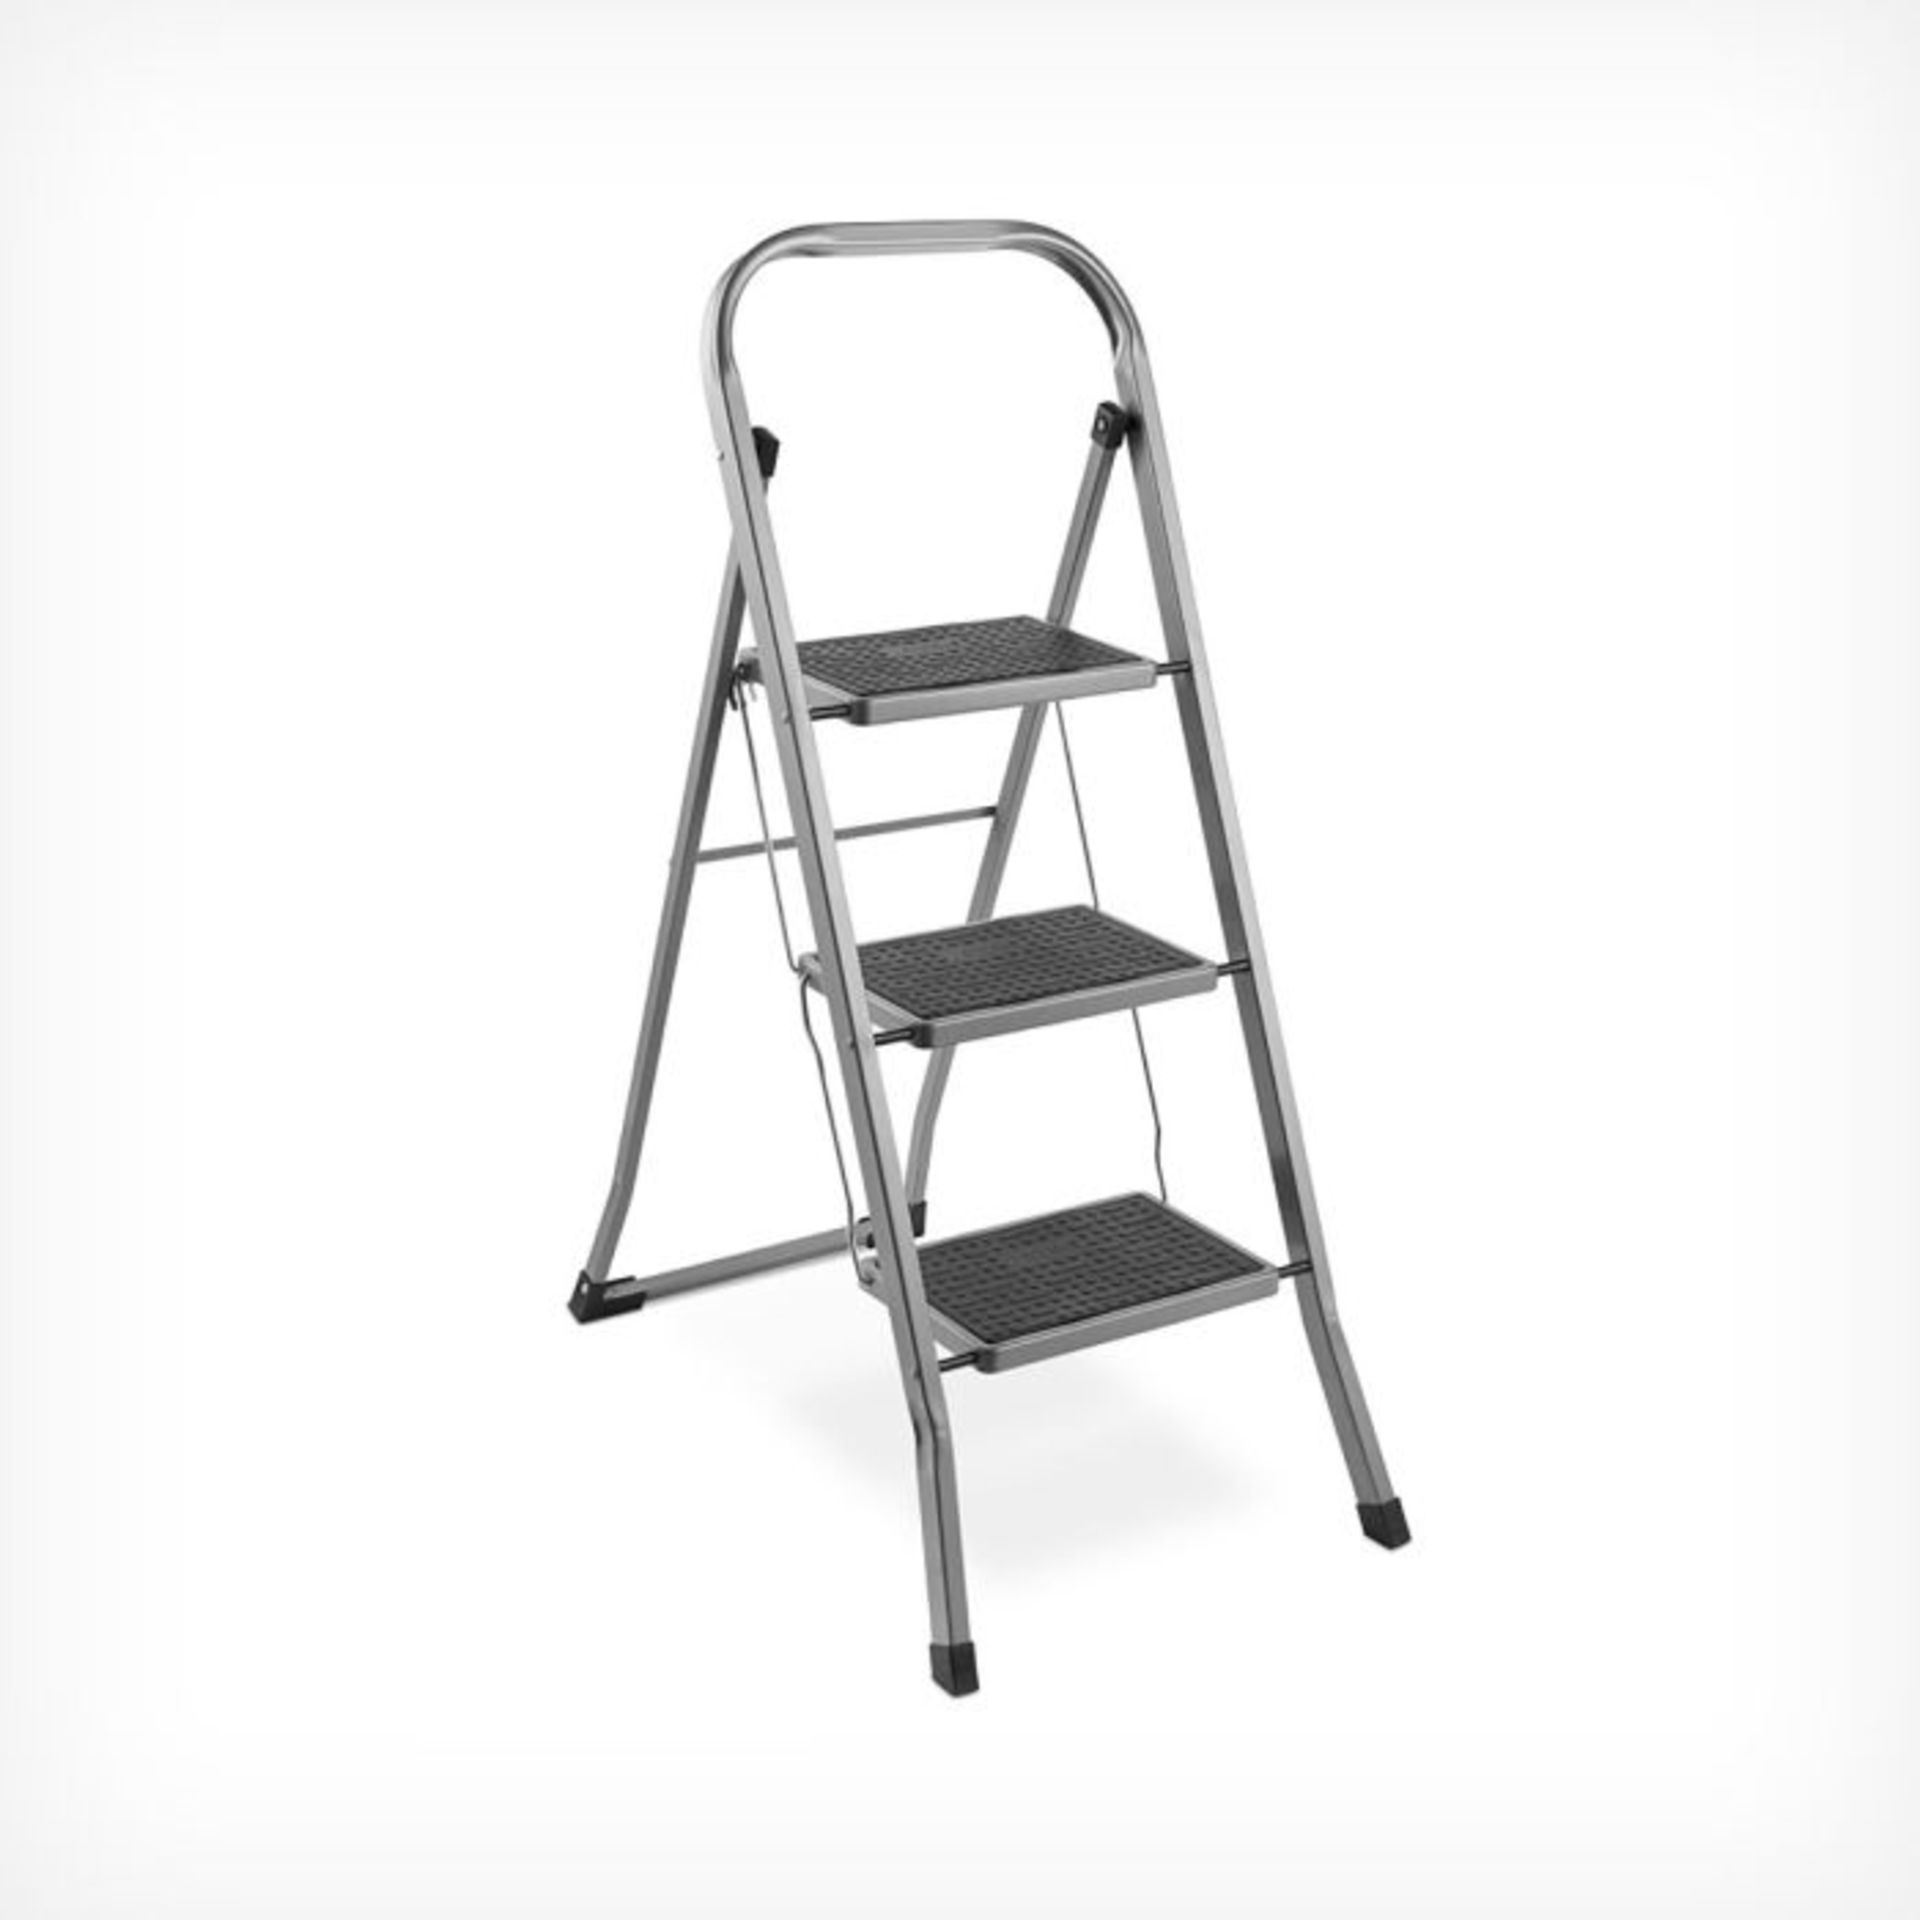 3 Step Steel Ladder. - ER36. Combining usability with durability, this step ladder is a perfect